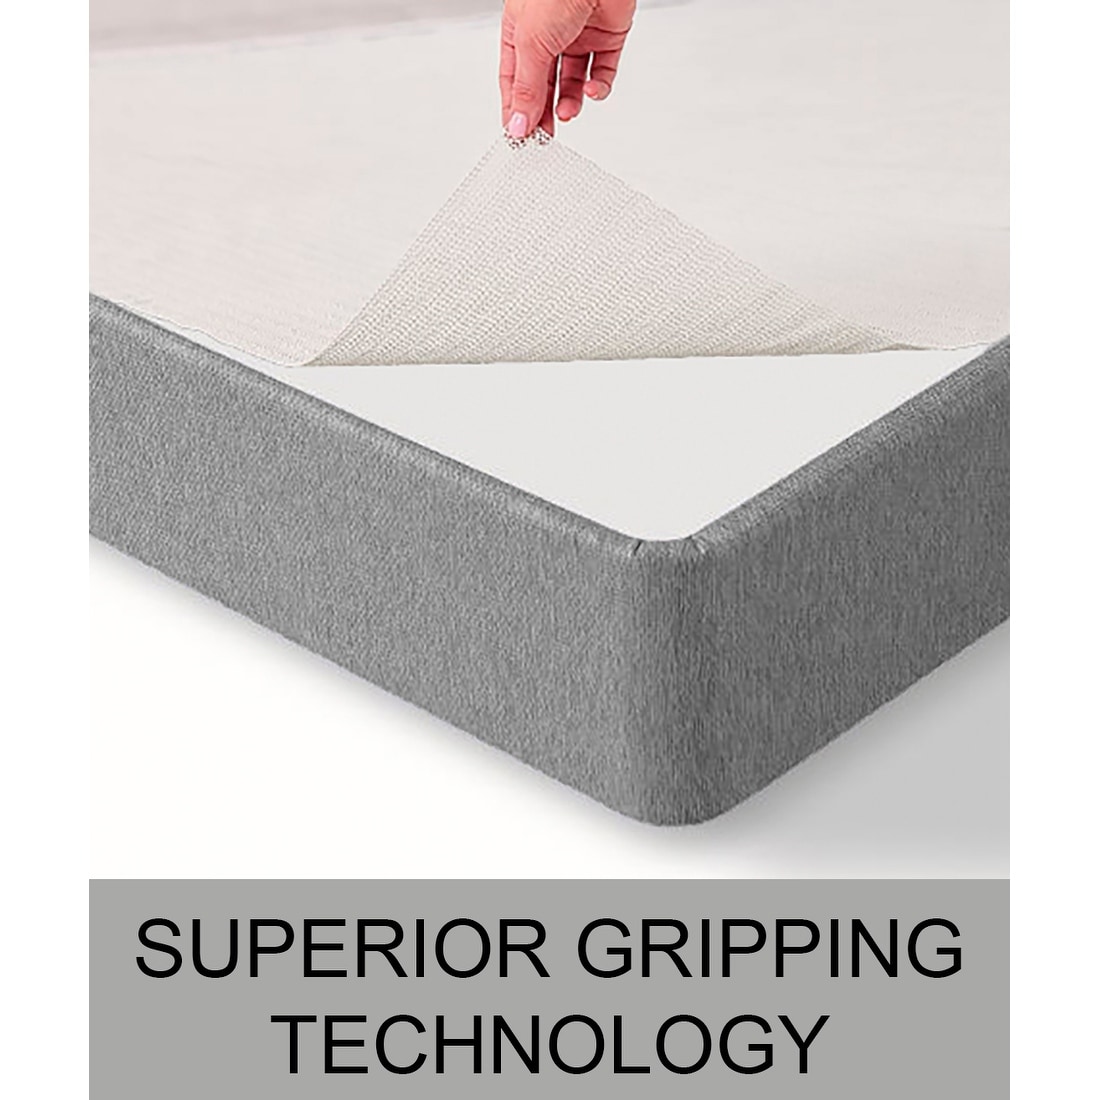 https://ak1.ostkcdn.com/images/products/is/images/direct/0c9ded38bc97cab3b7bf88e0d6b9aacbad235195/Strong-Grip-Non-Slip-Slip-Resistant-Mattress-Slide-Stopper-and-Gripper.jpg